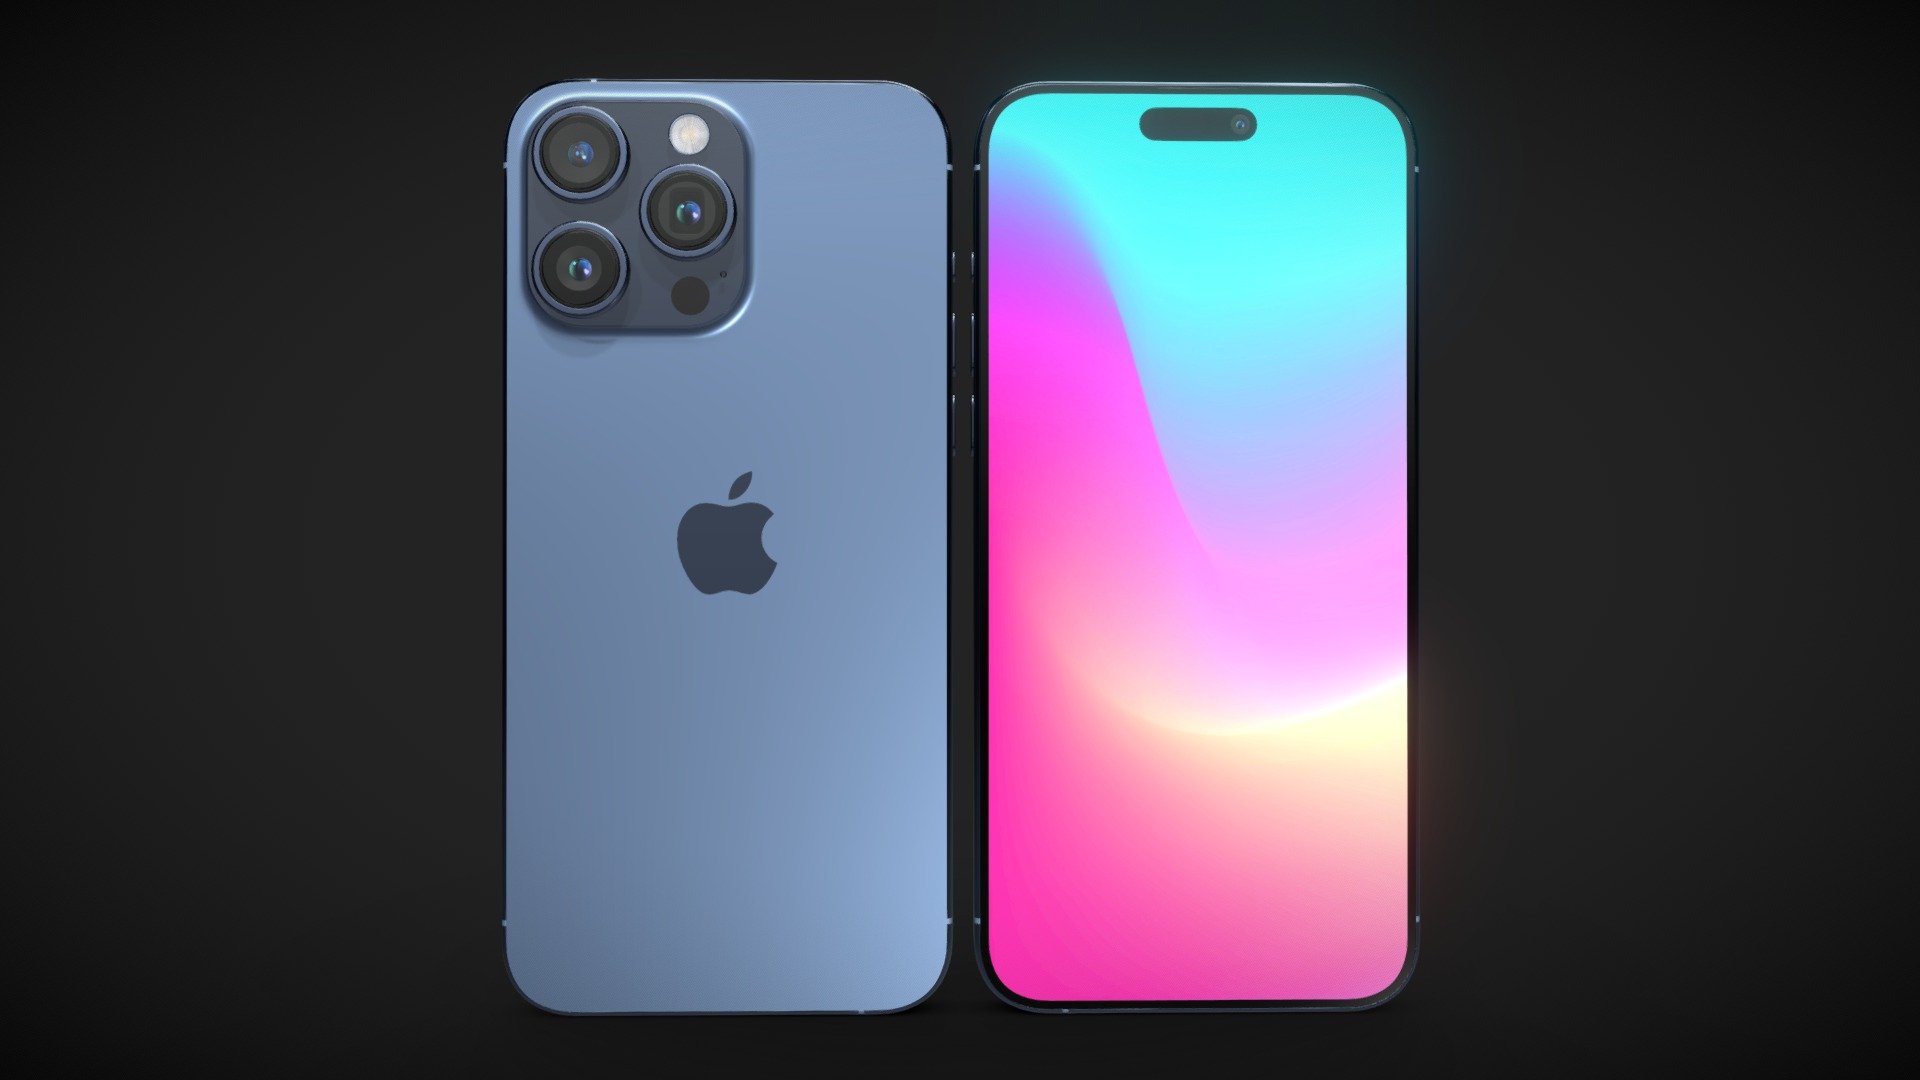 Apple iPhone 15 Pro Max V2 - 3D Model by madMIX